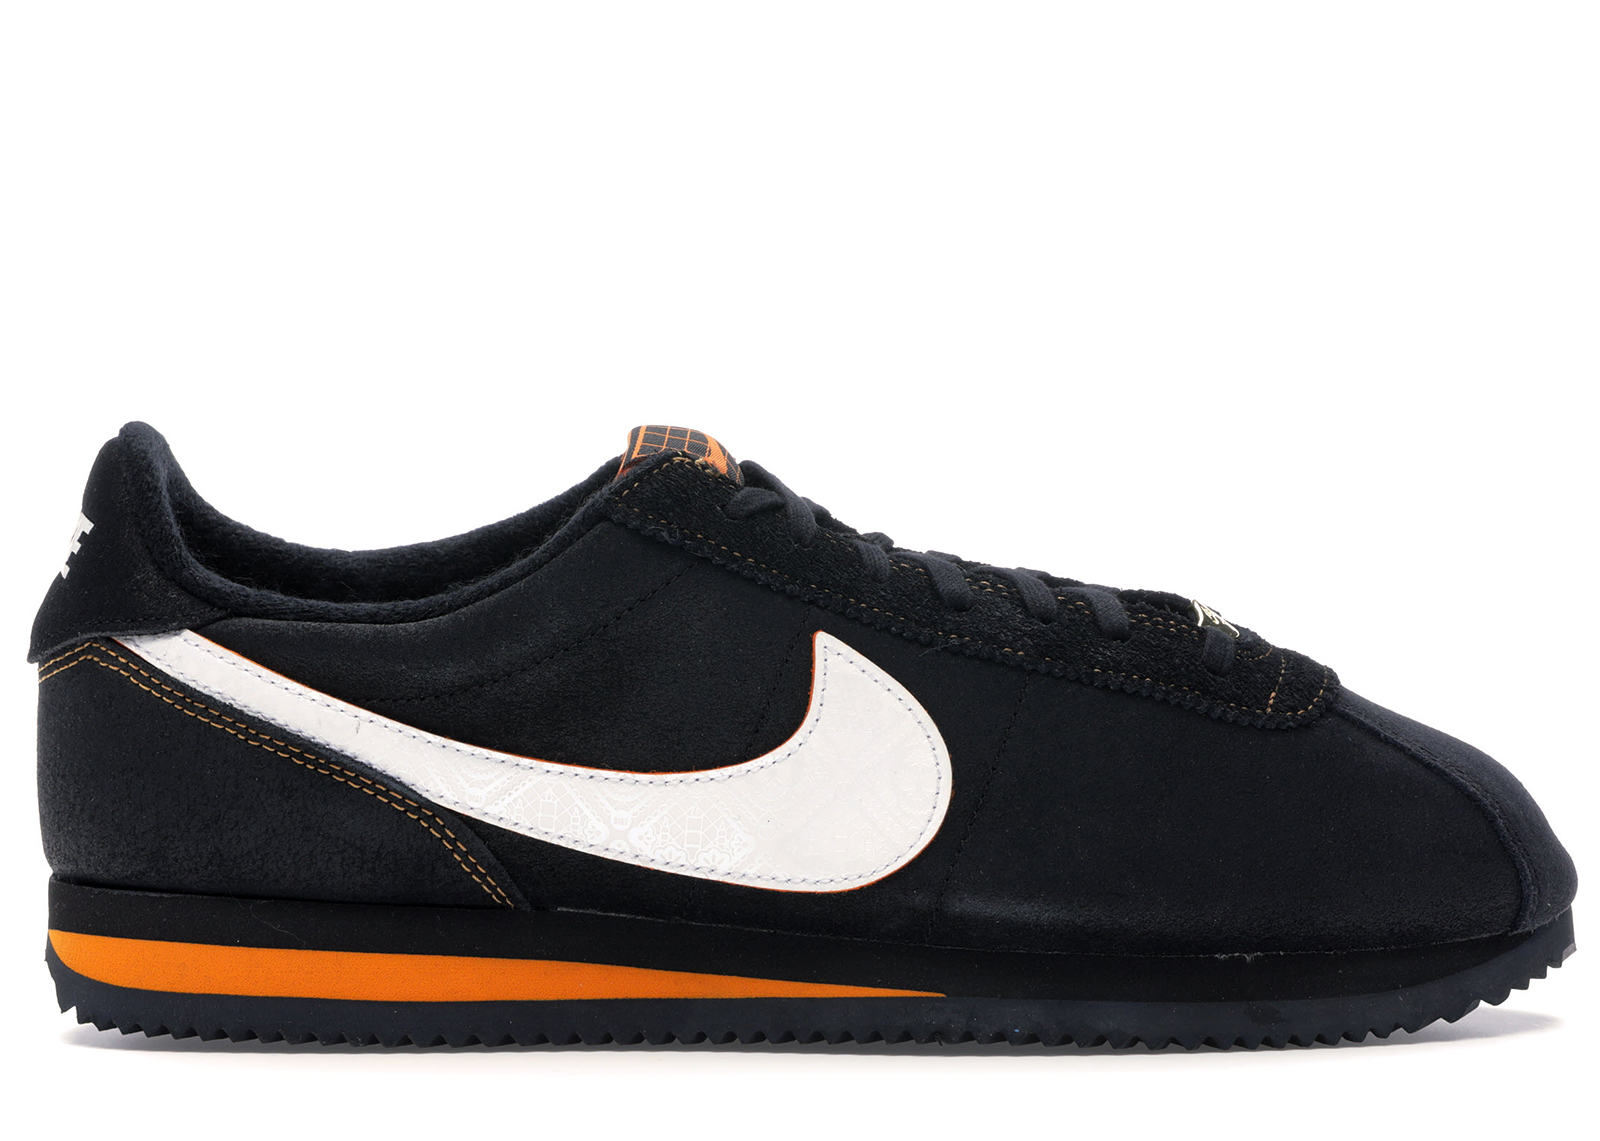 Nike Cortez Day of the Dead (2019) - CT3731-001